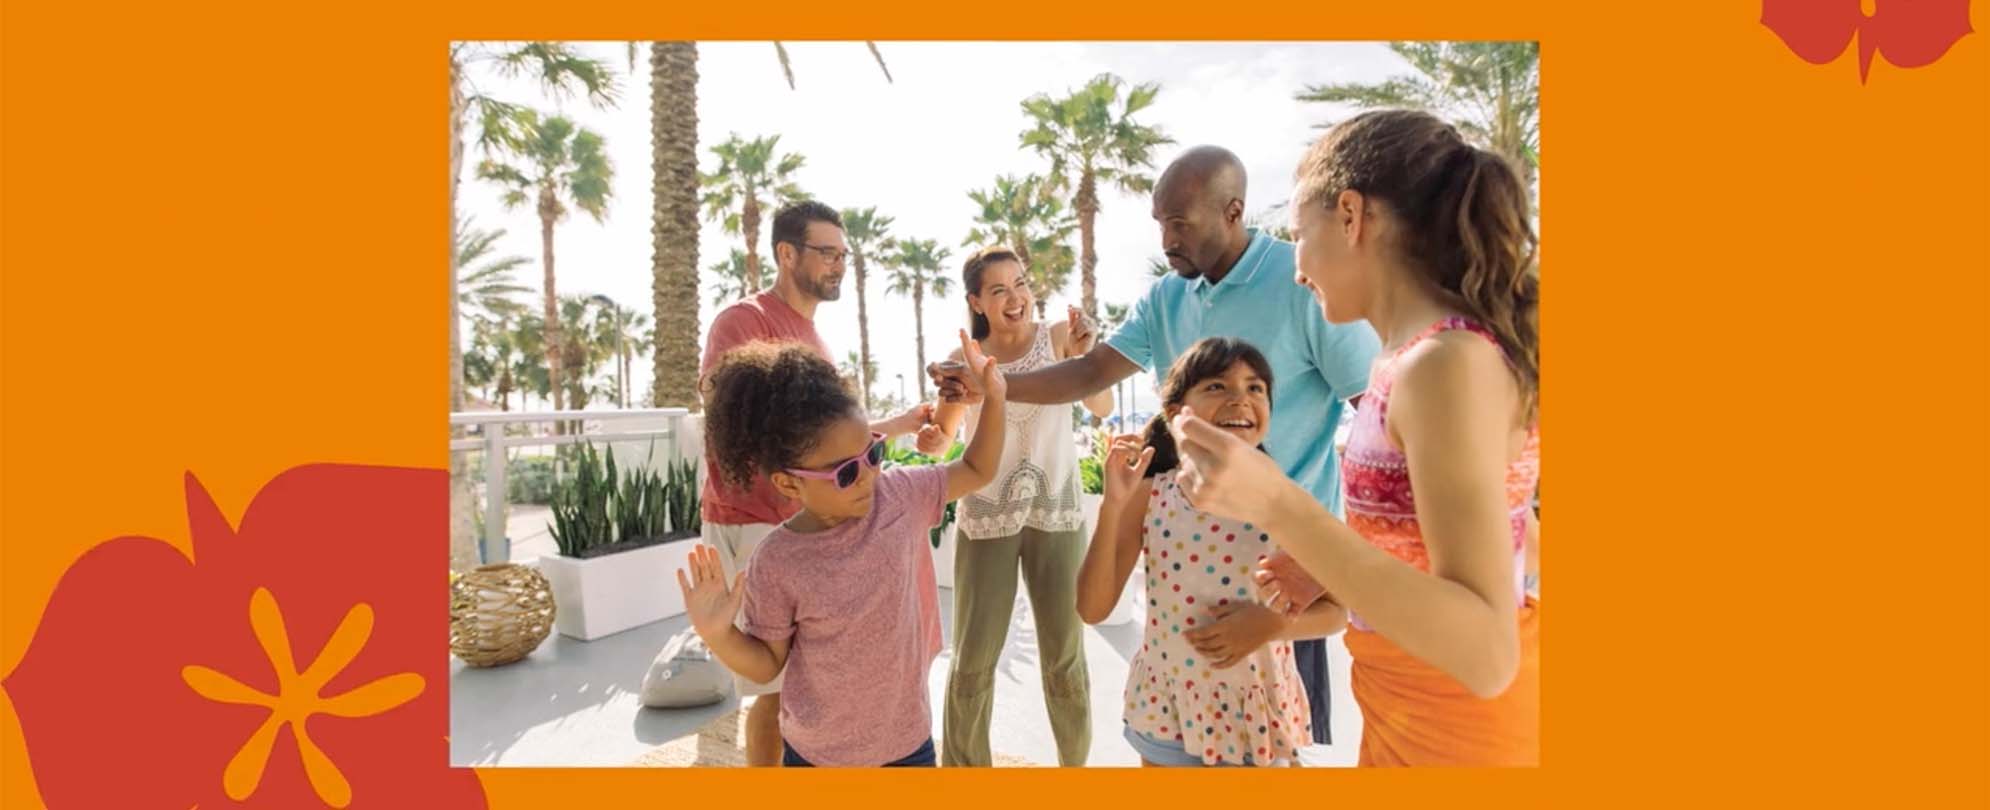 Kids and adults dancing and smiling outside at a WorldMark resort.